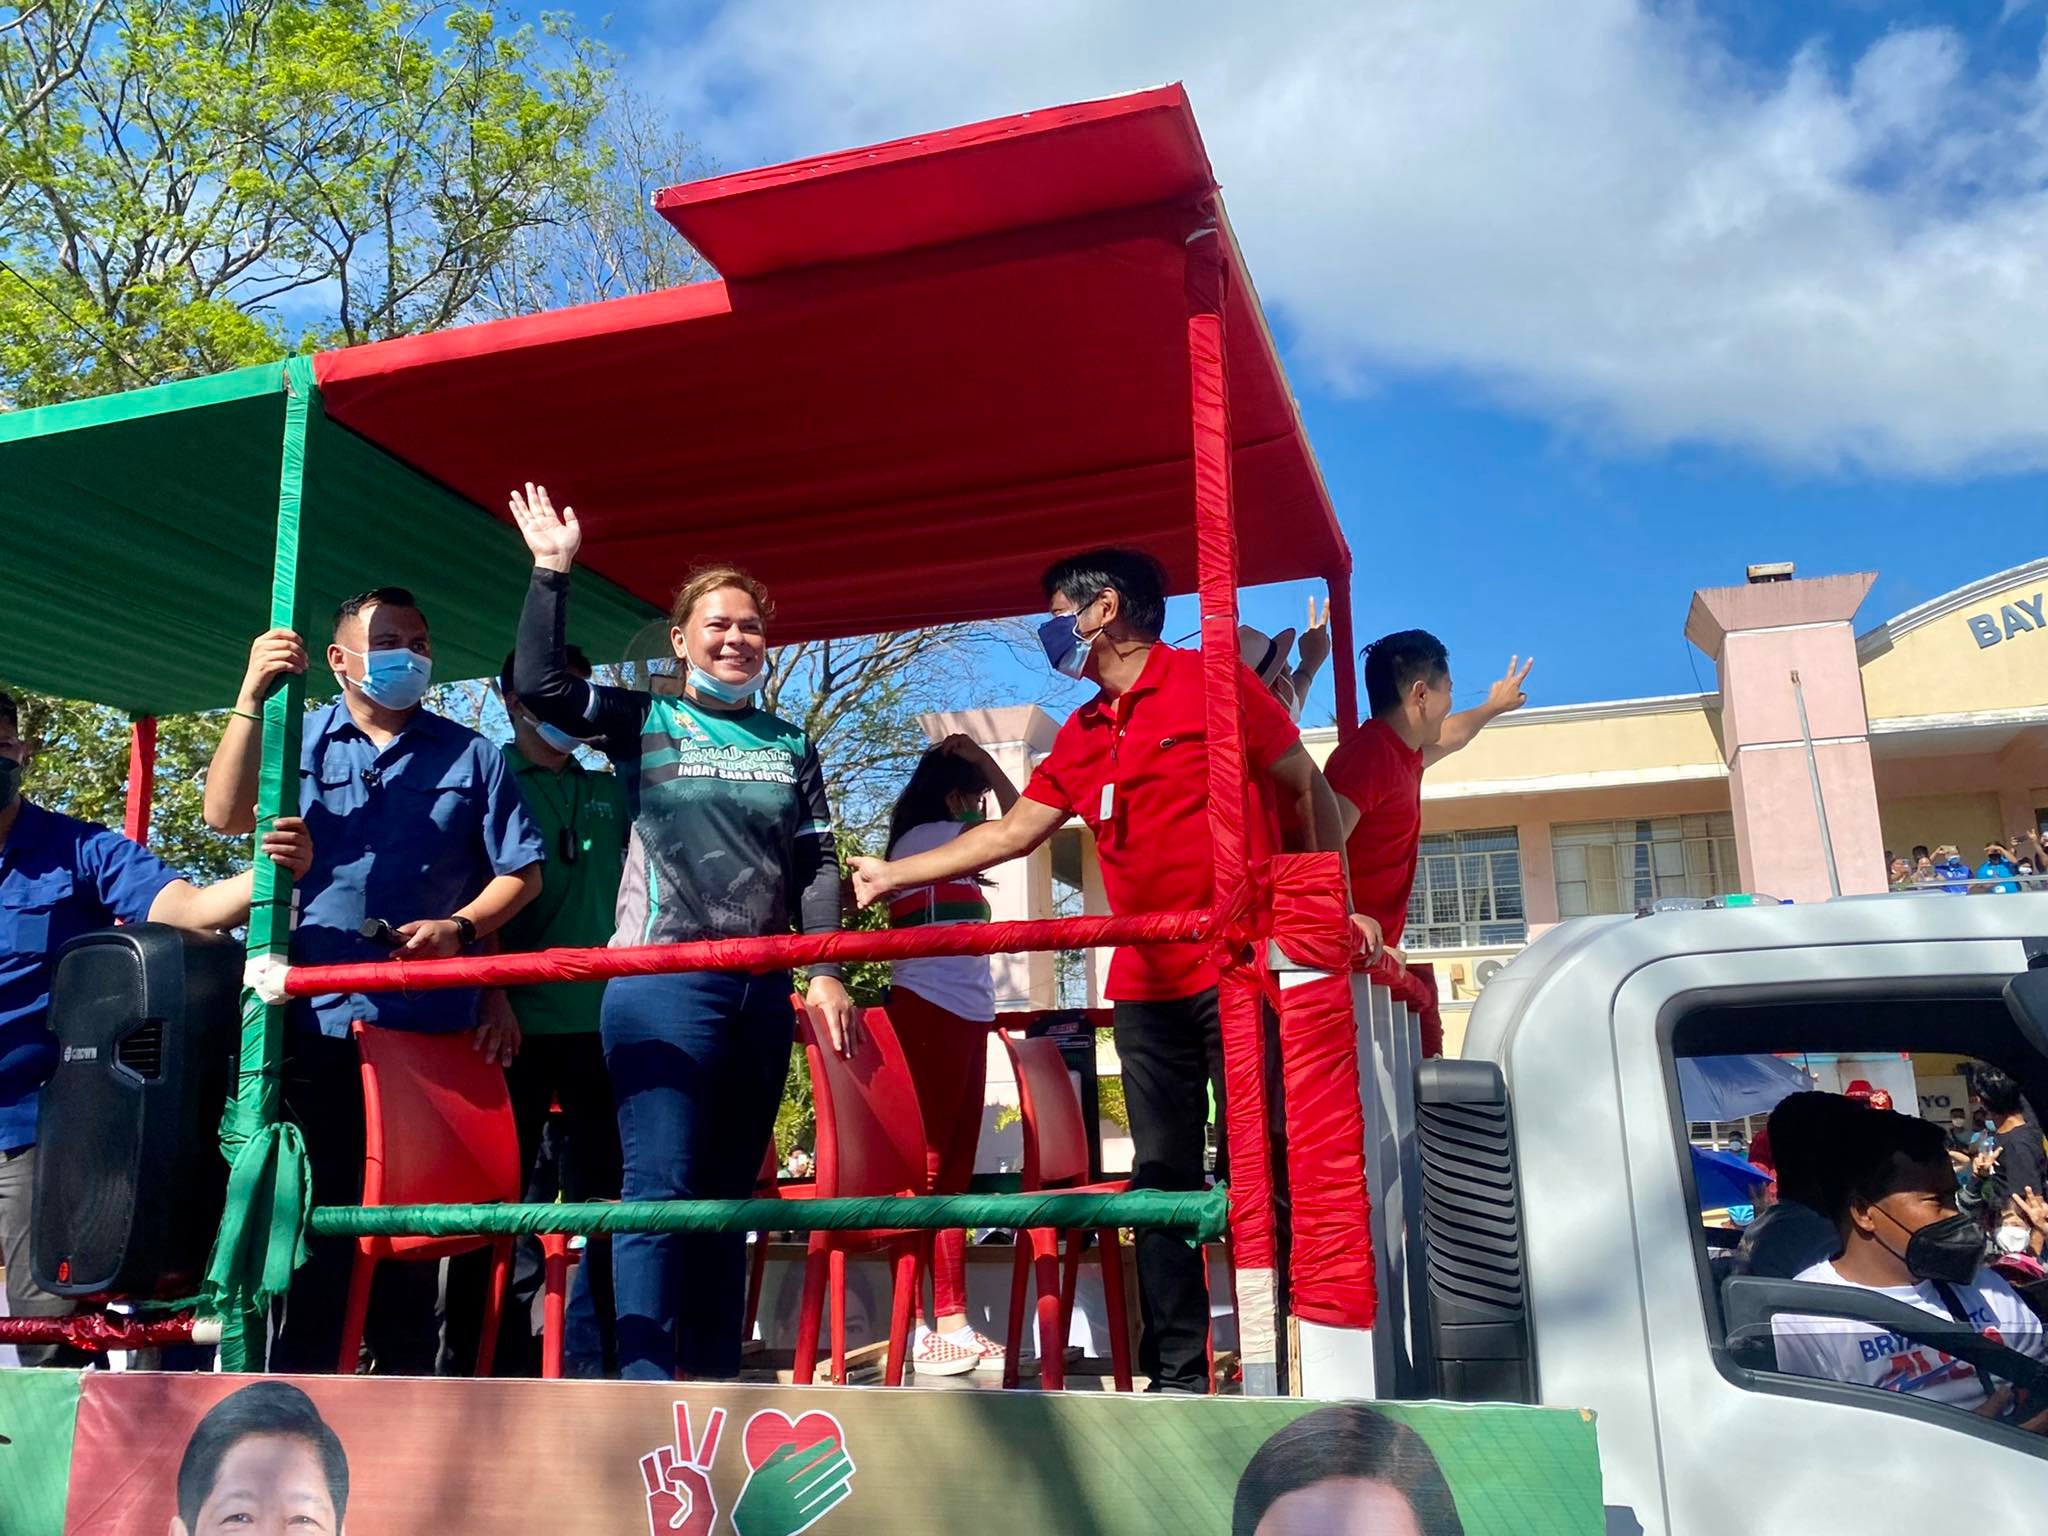 After visiting Ilocos Norte on Wednesday, the tandem of presidential aspirant Ferdinand "Bongbong: Marcos Jr. and his running mate, Sara Duterte-Carpio, continued their campaign sortie in nearby Ilocos Sur province on Thursday.